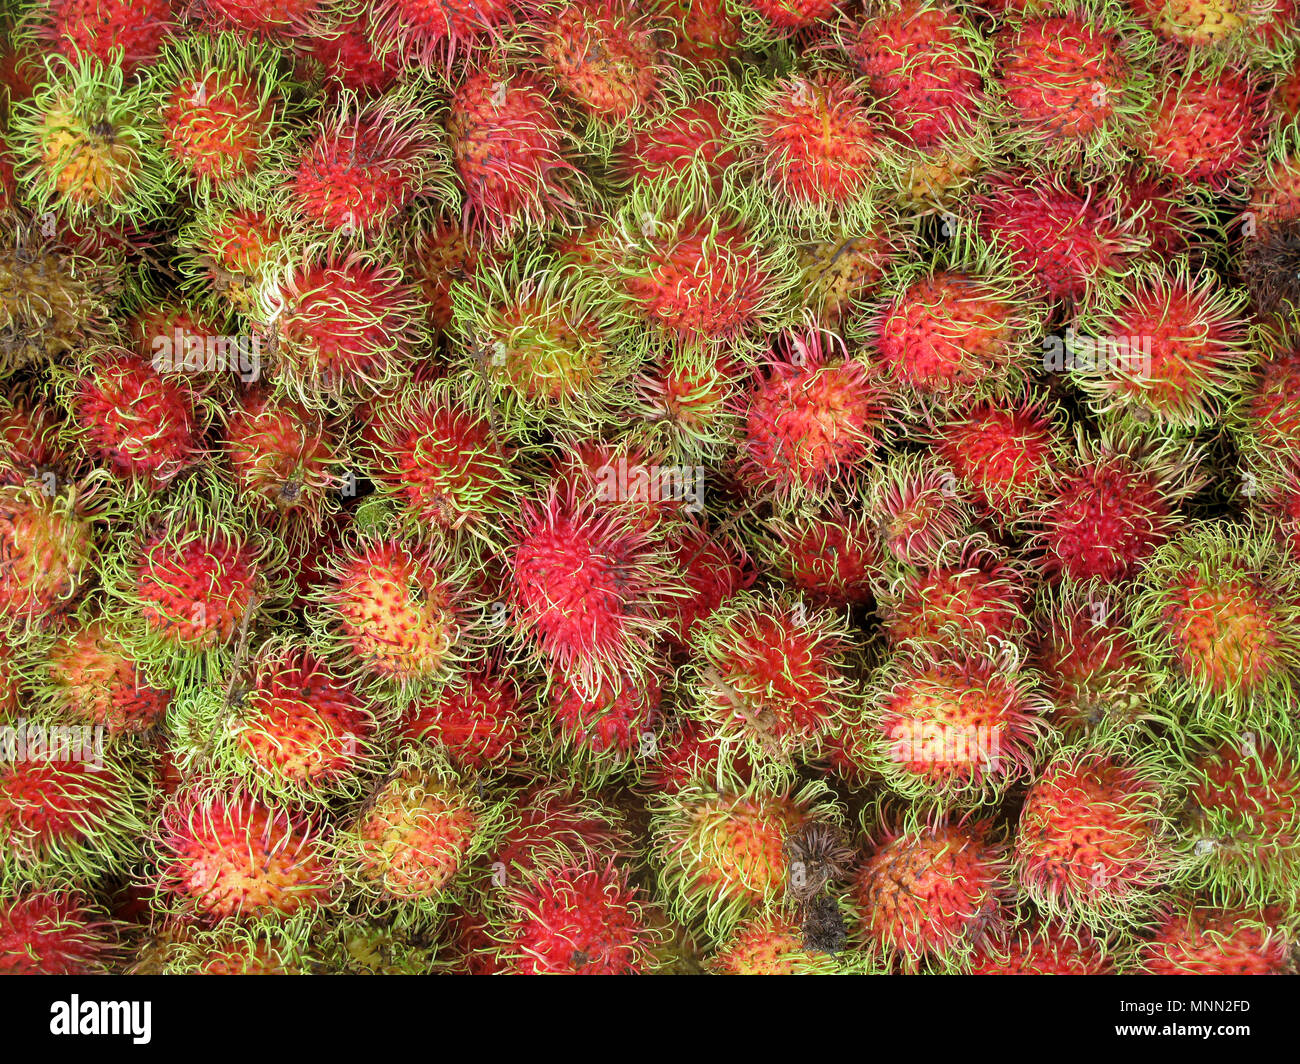 Rambutan, Nephelium Lappaceum, the lychee like fruit with long hooked spines, Costa Rica, Central America Stock Photo